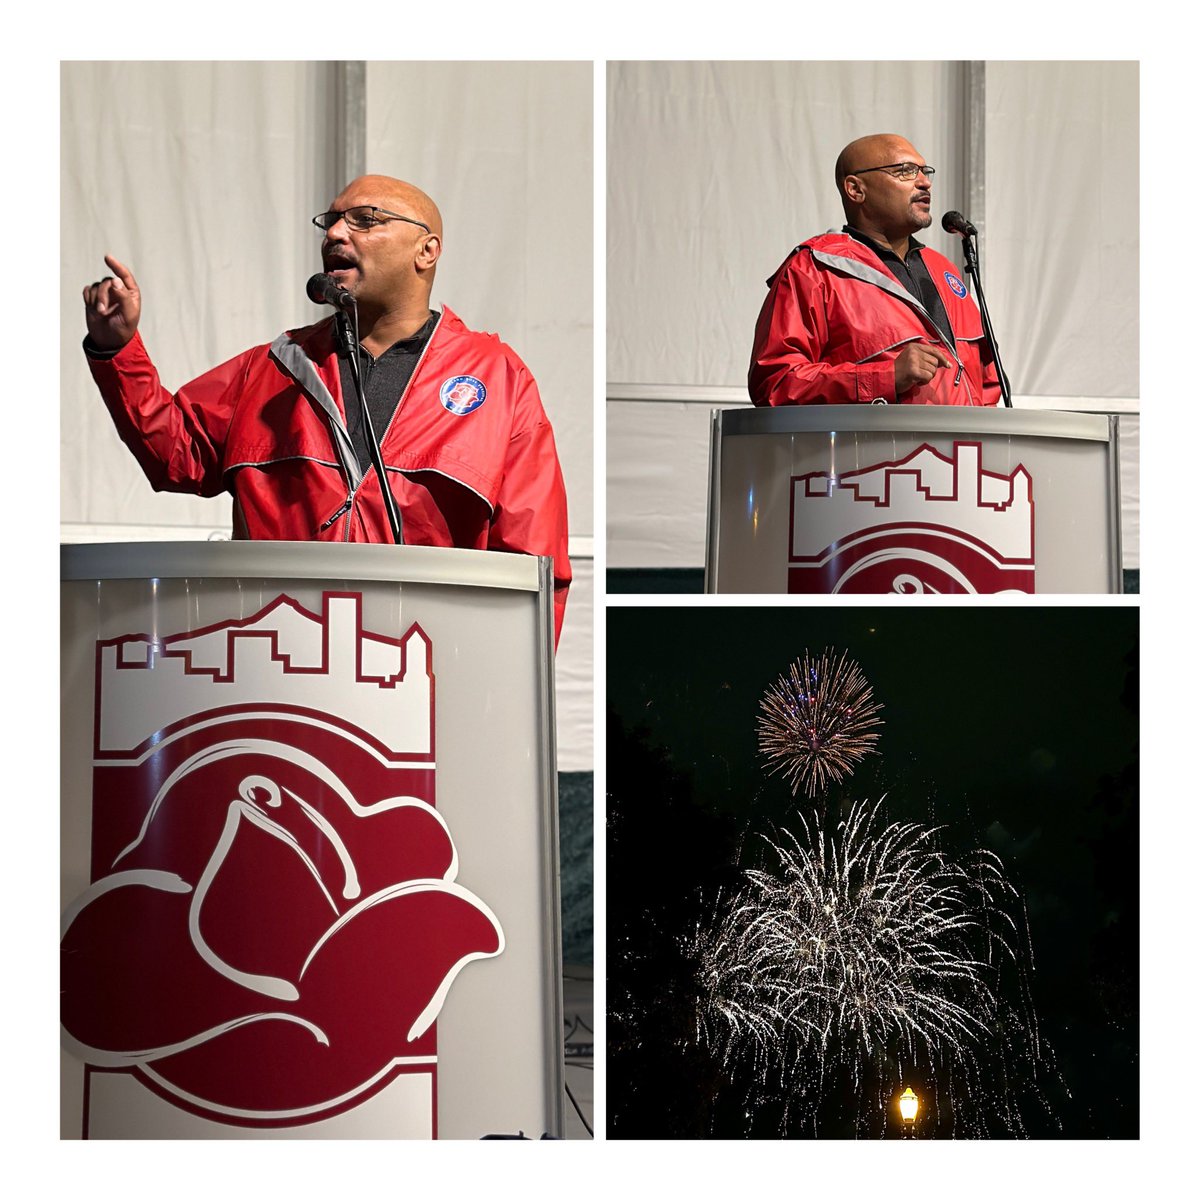 I was thrilled to kick off the Rose Festival Season on Friday evening and help set the stage for an incredible firework show. I encourage everyone to check out the @PDXRoseFestival schedule to join the festivities or support the community and sign up as a volunteer here: